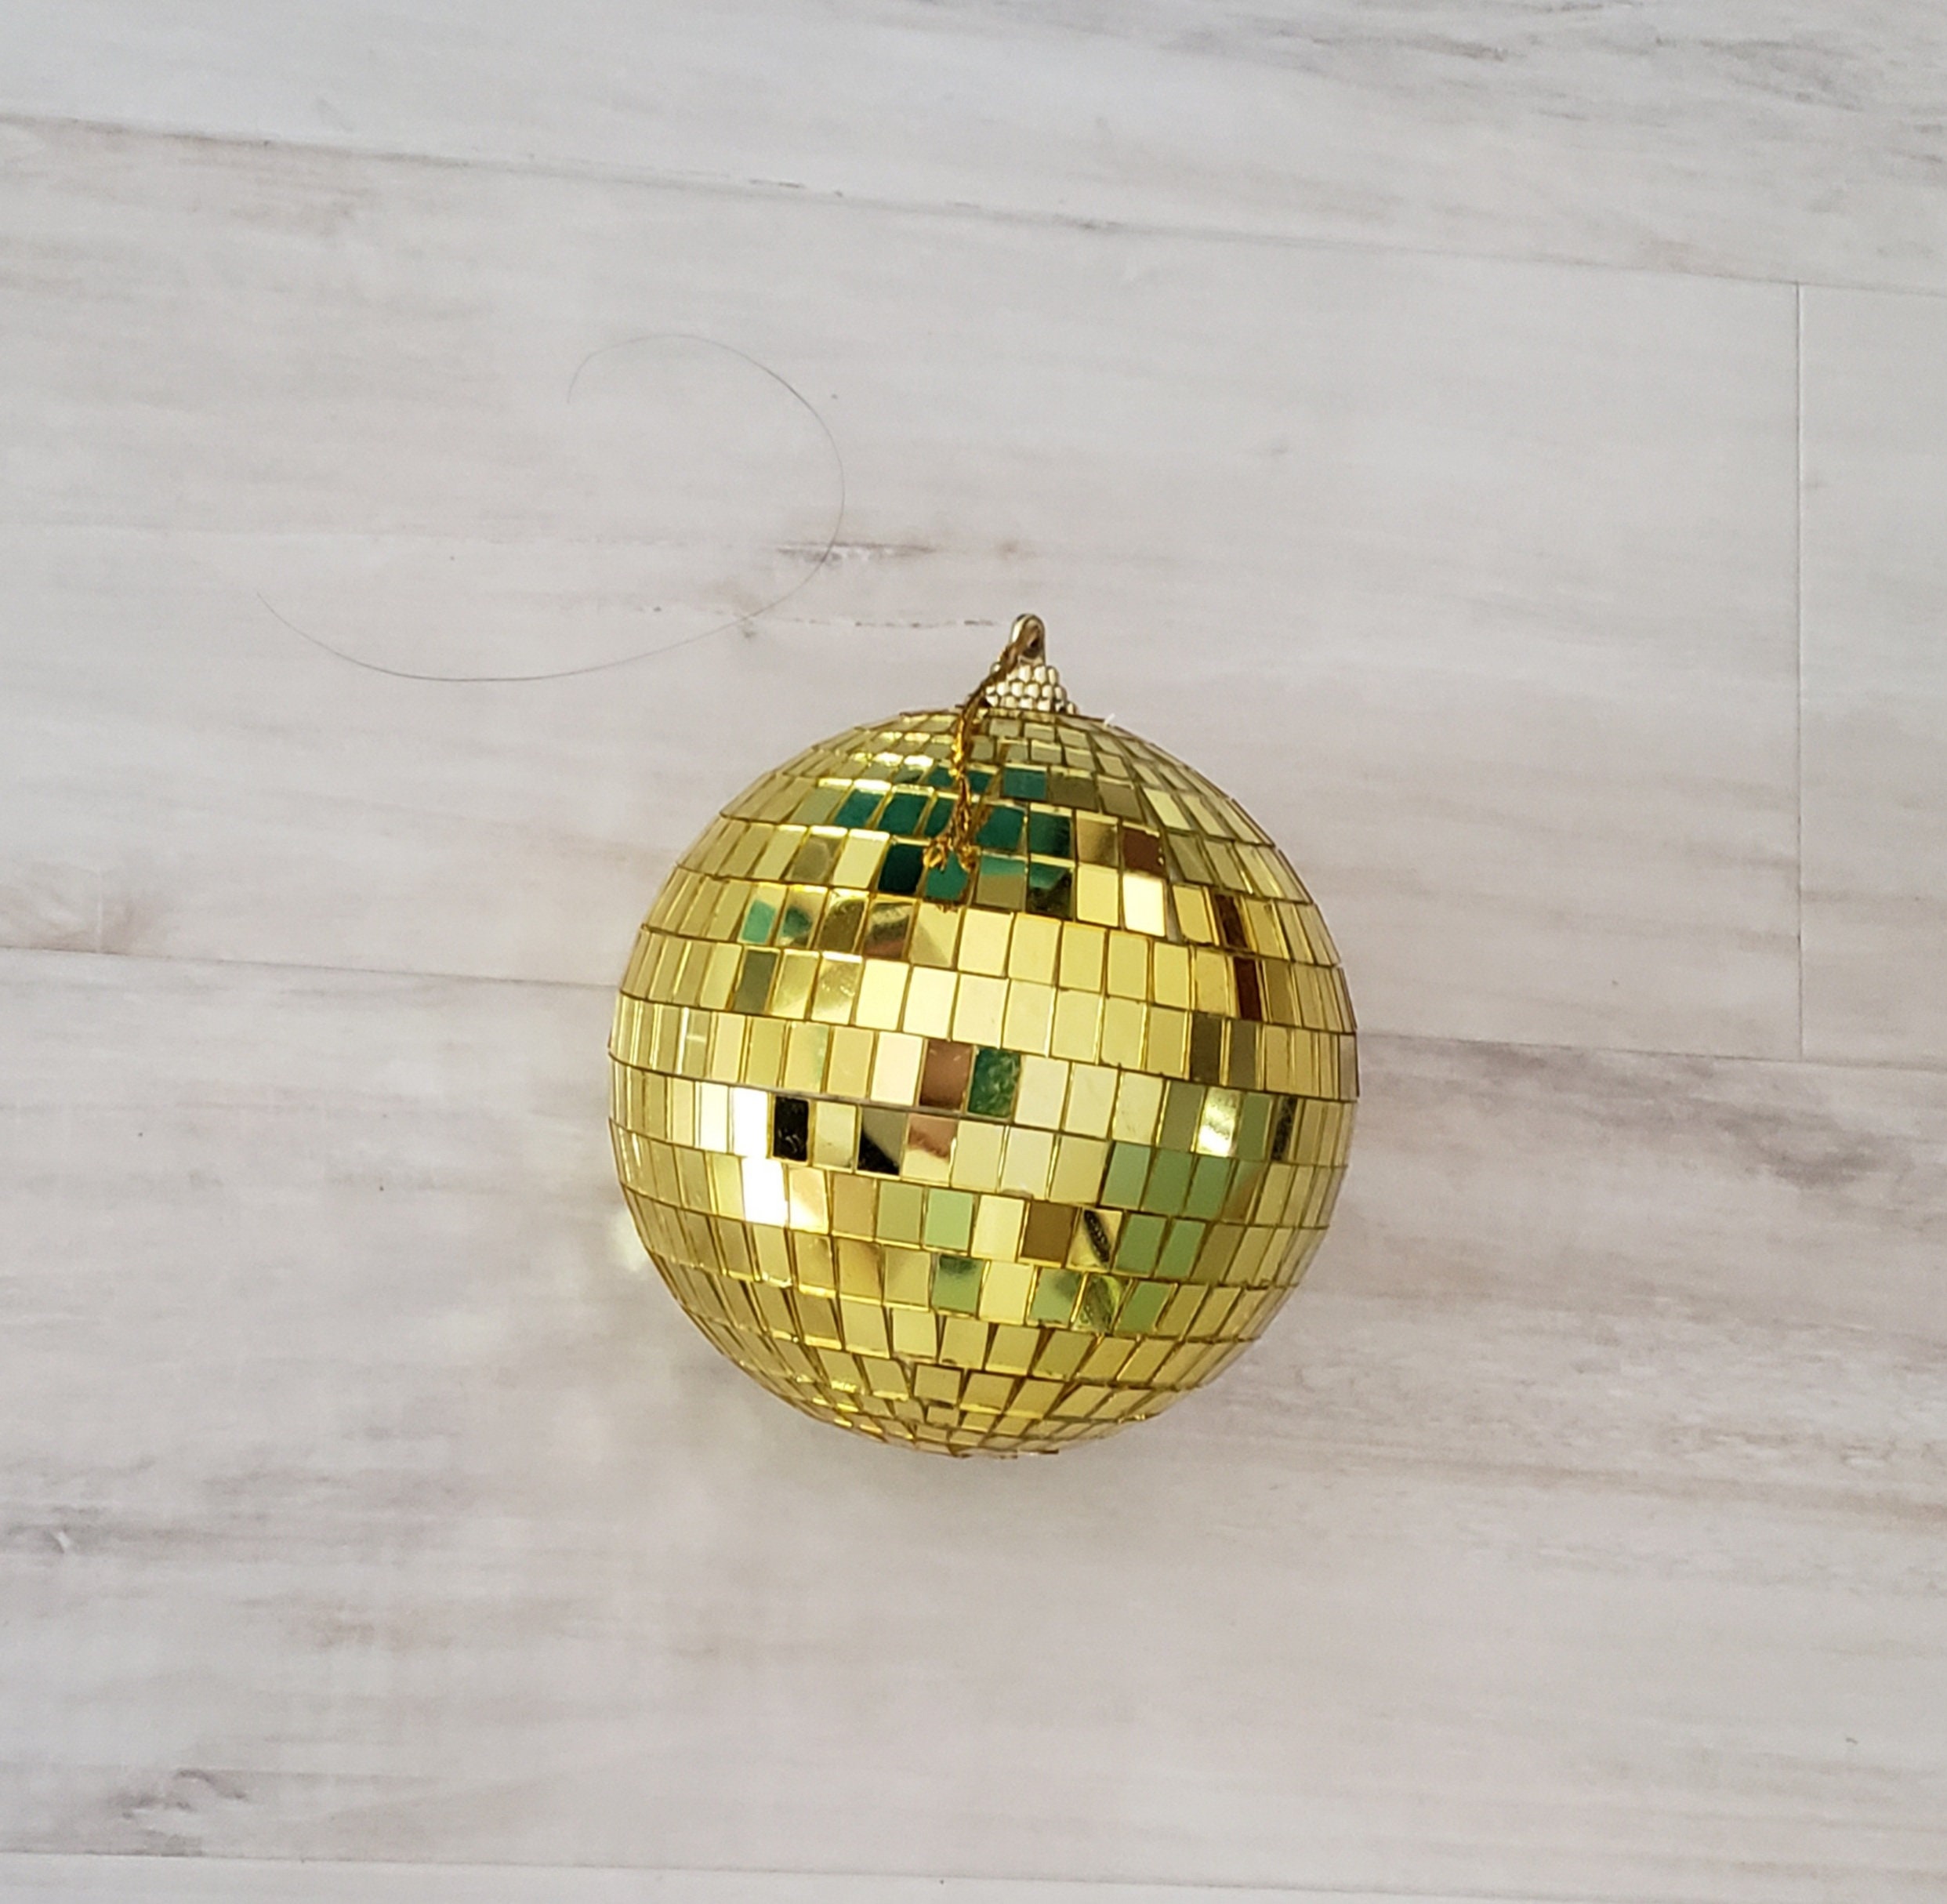 Gold Disco Balls Archives - Griffin & Griffin - The Event Light Pros